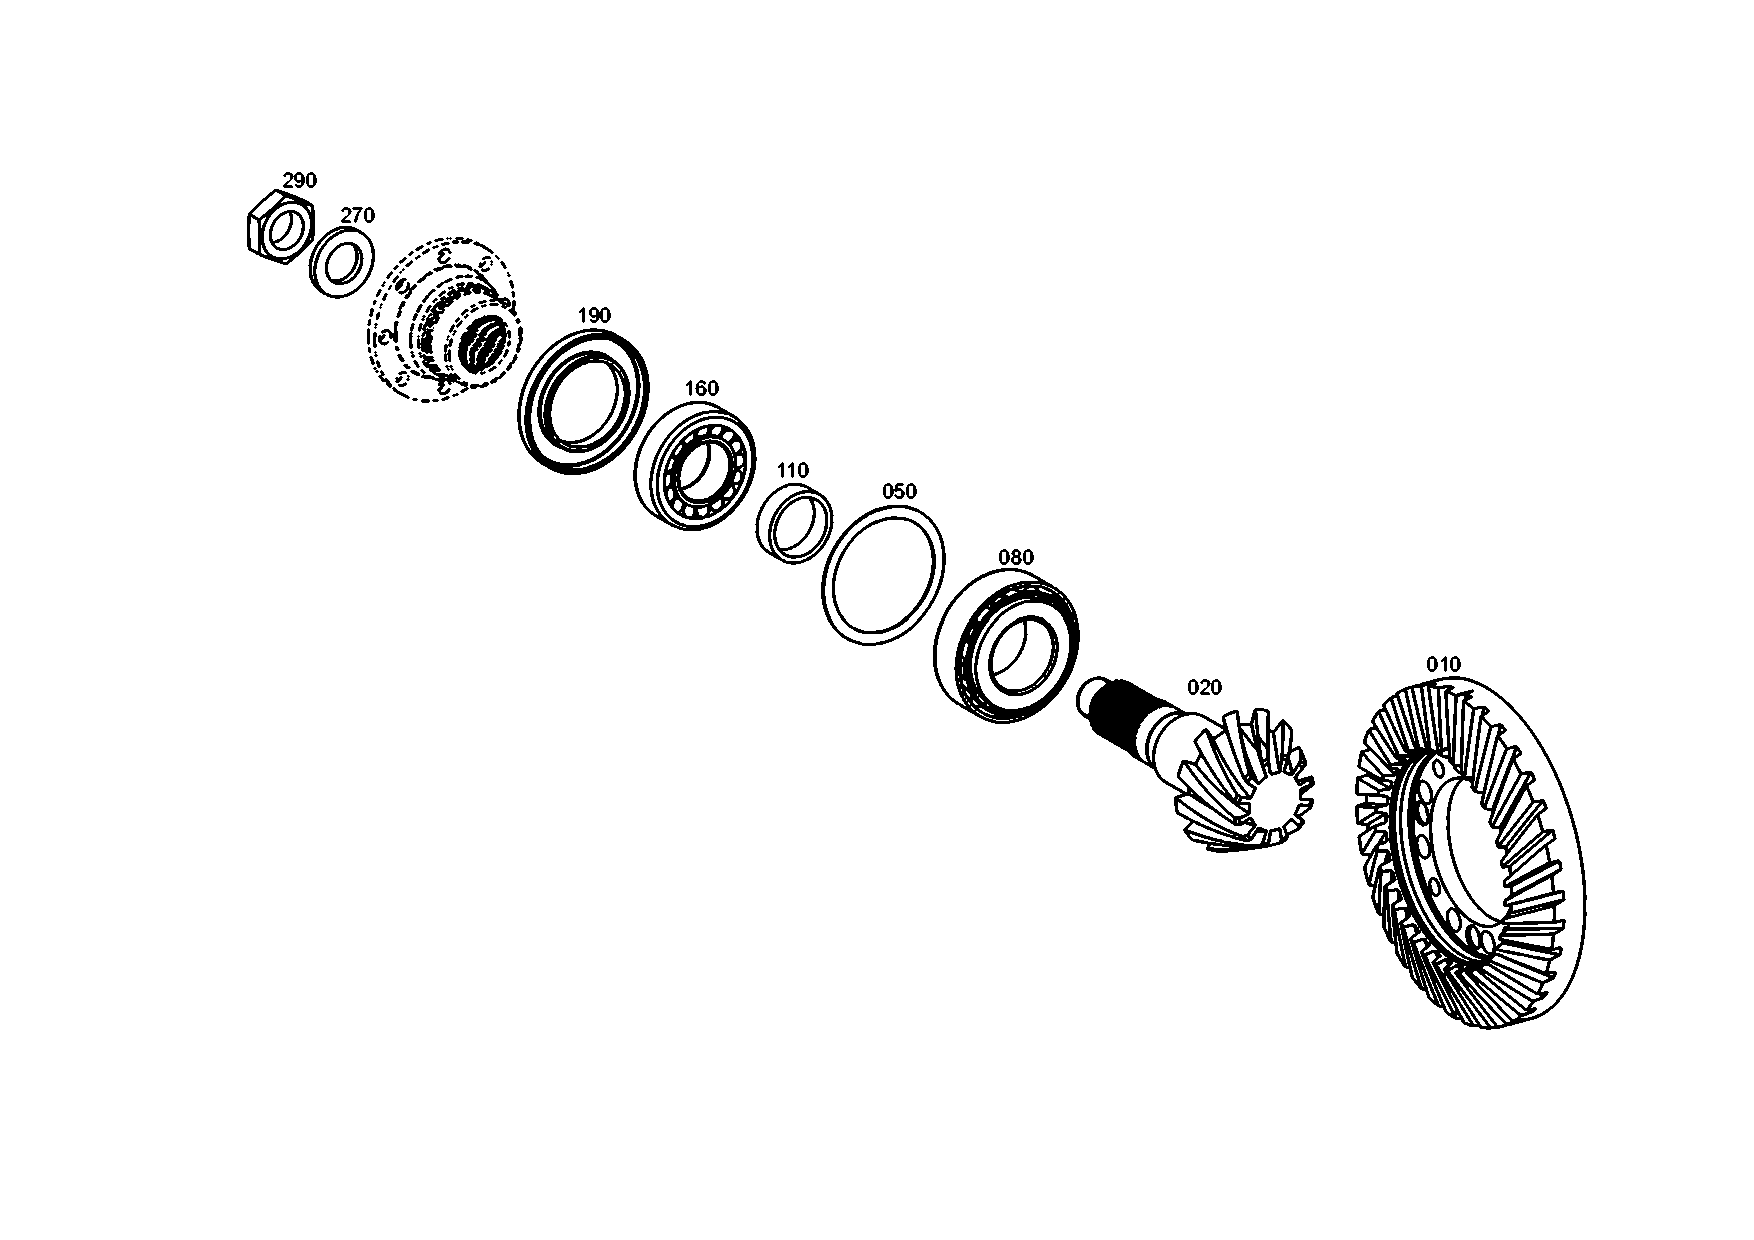 drawing for CATERPILLAR INC. 7029697 - RING (figure 4)